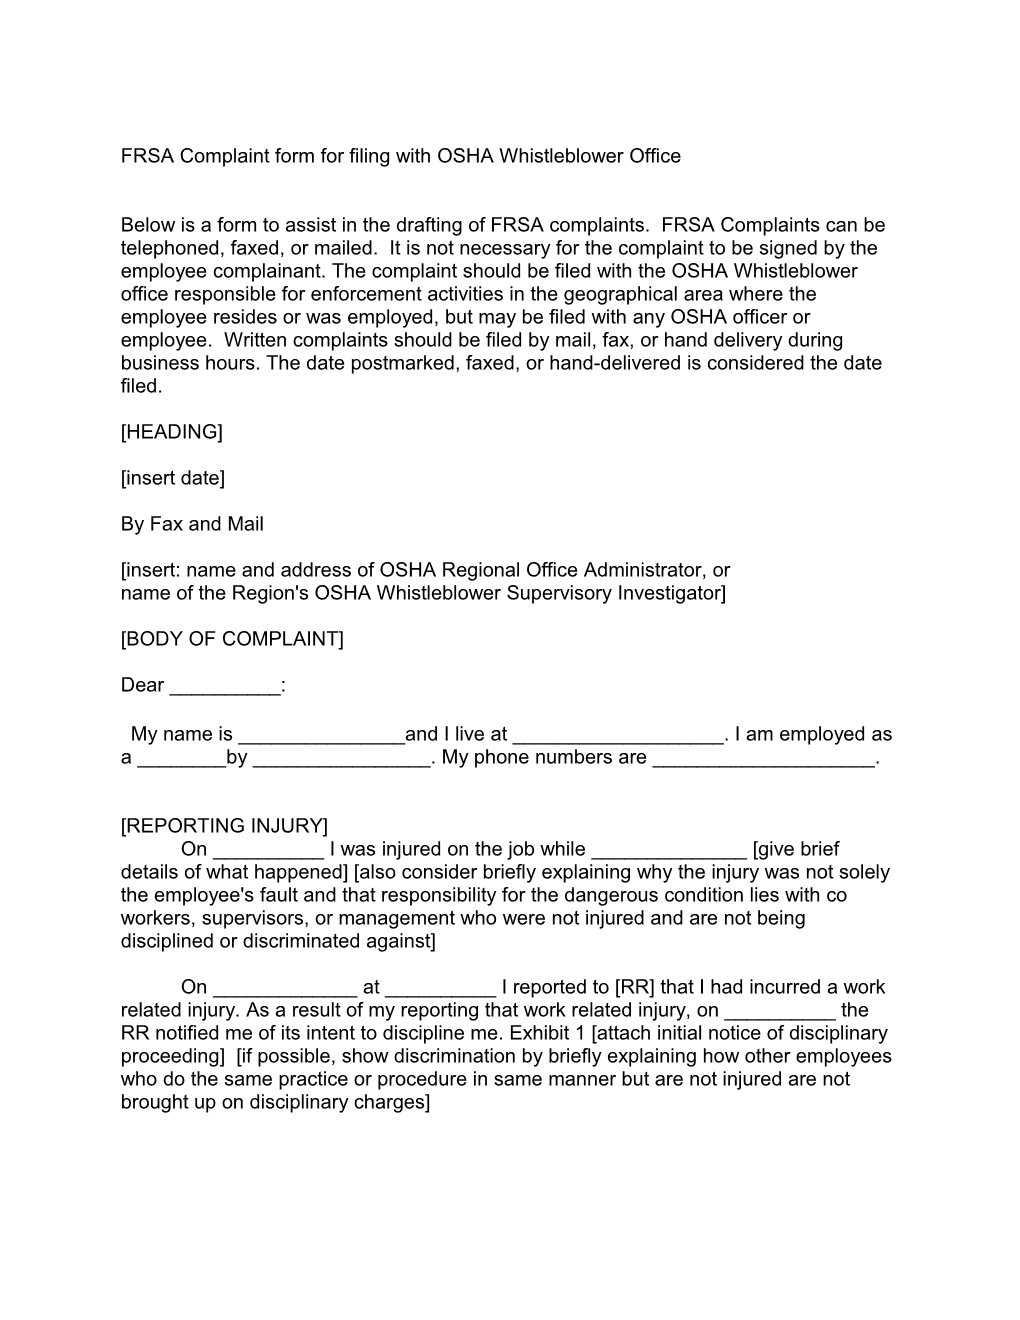 FRSA Complaint Form for Filing with OSHA Whistleblower Office